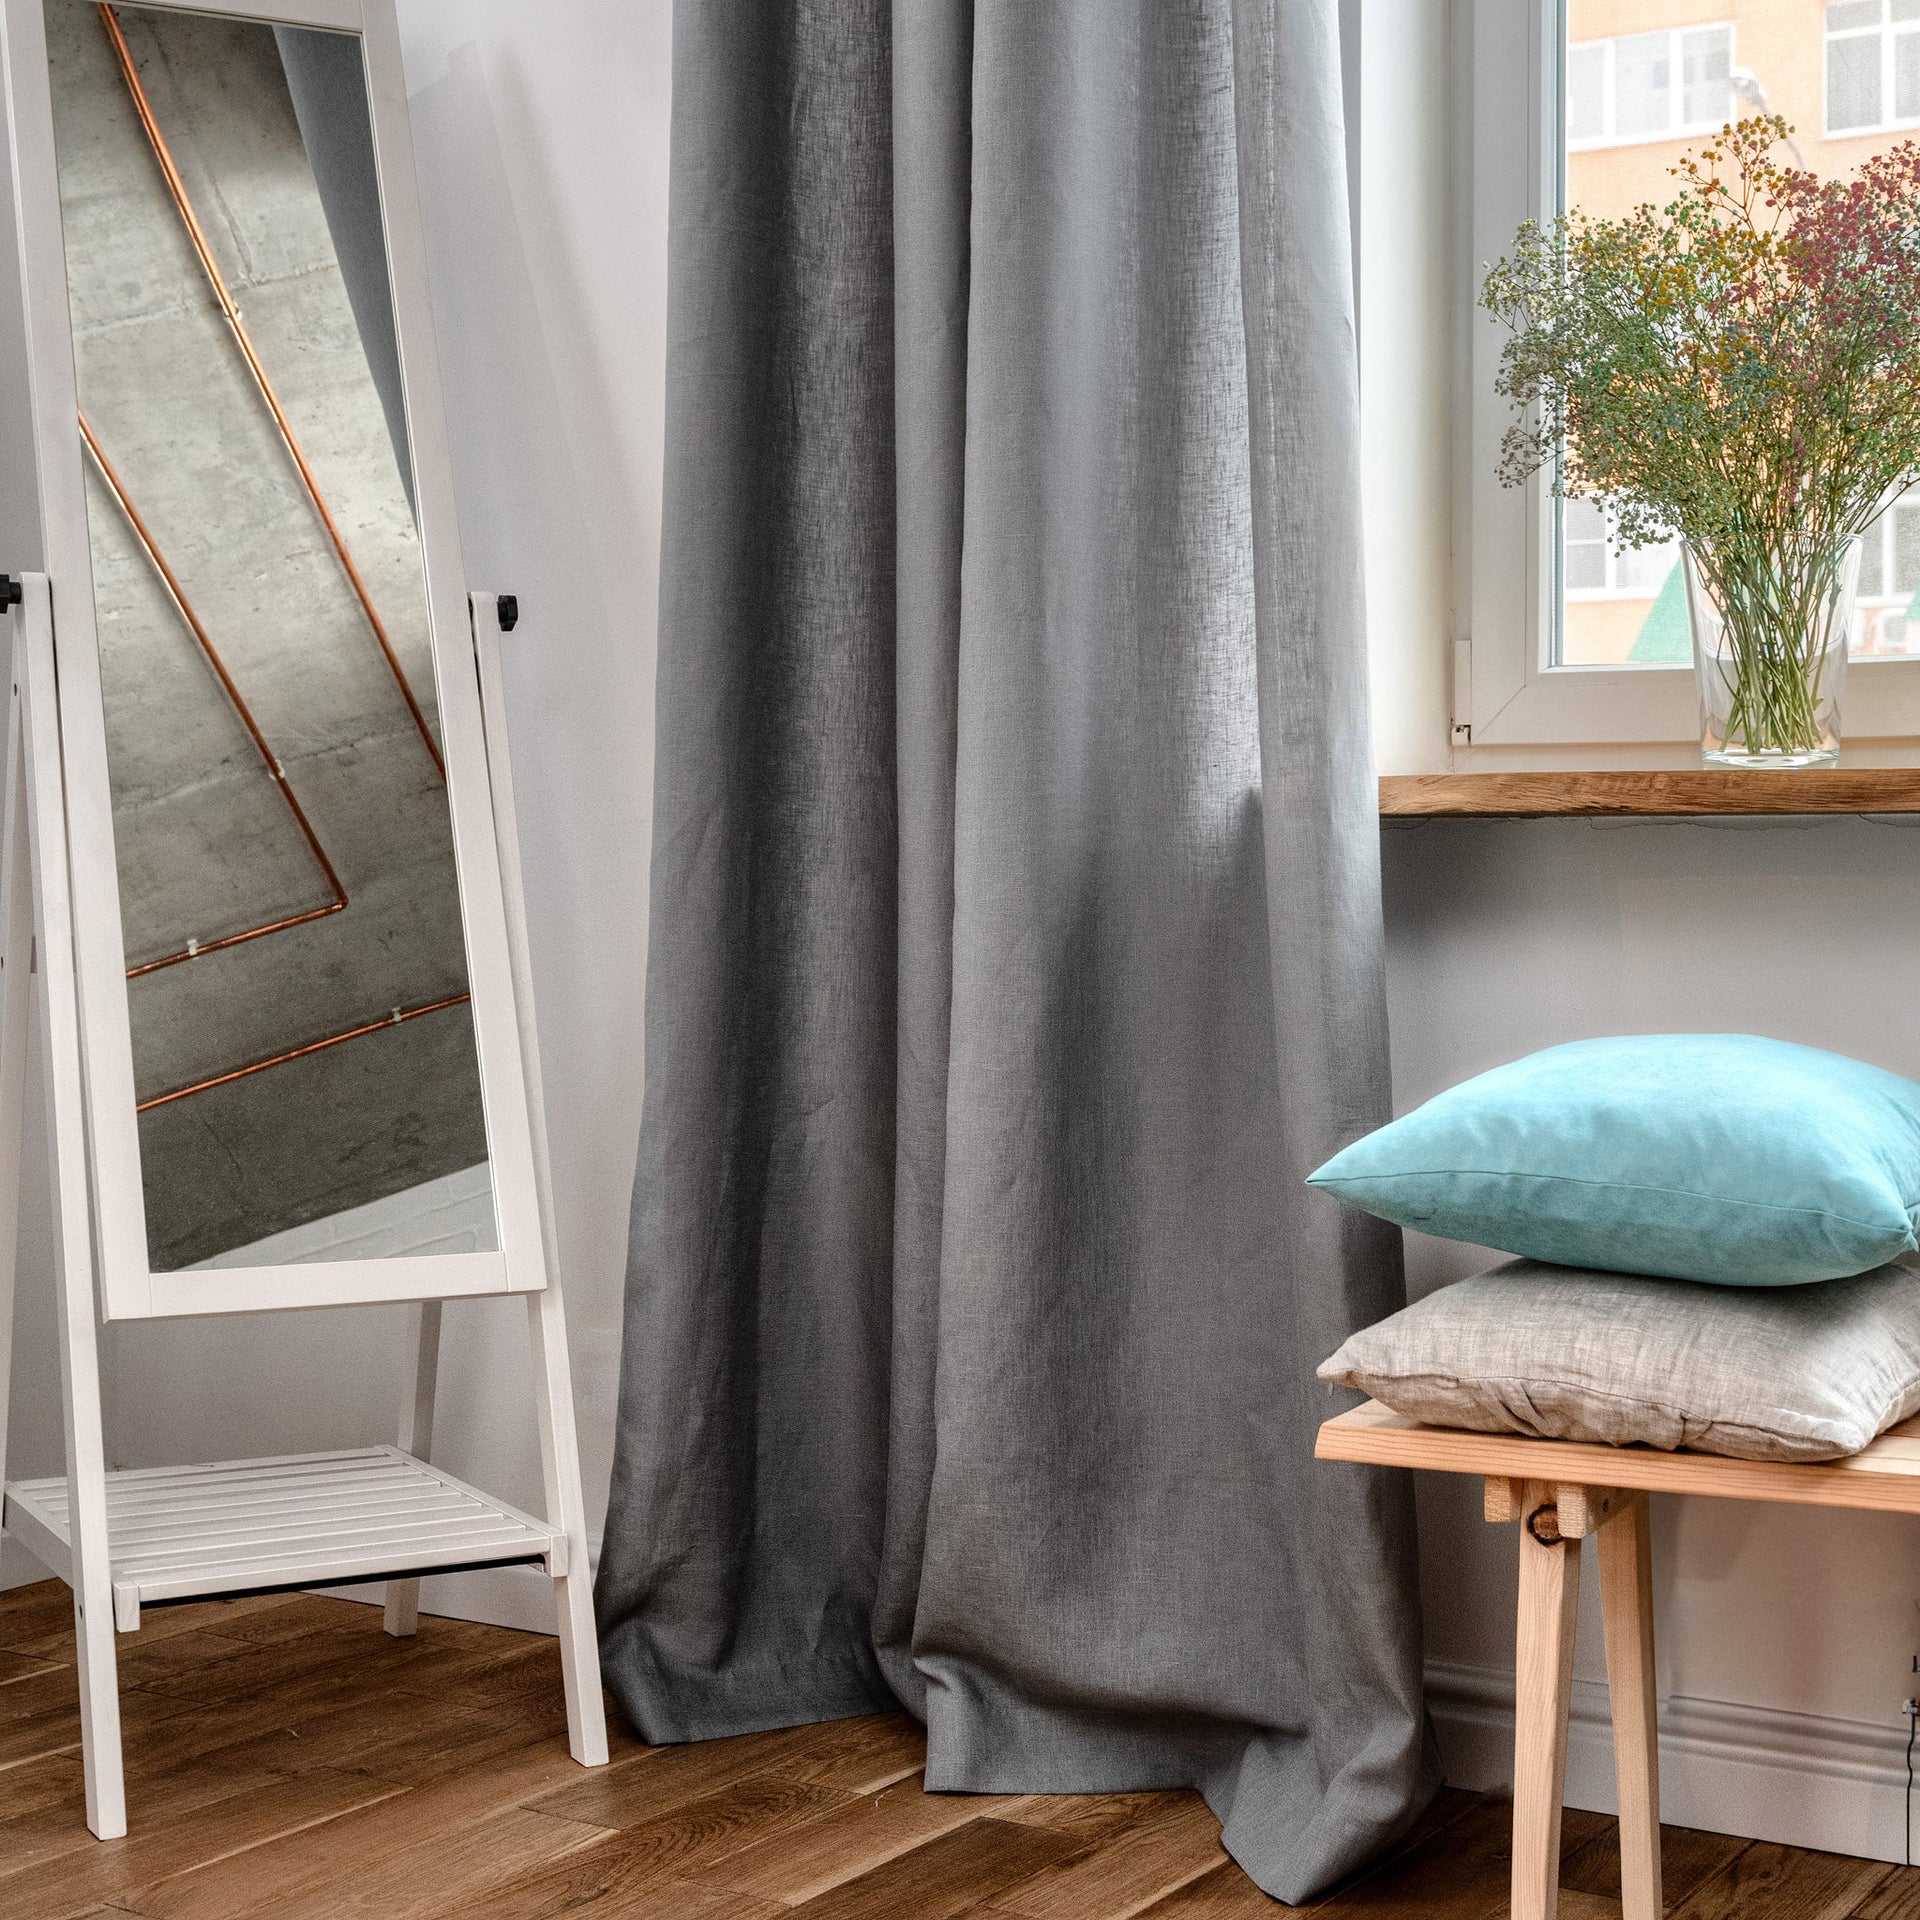 Grommet Linen Curtain Panel with Blackout Lining - Linen Window Treatments  - Eyelet Top Drapes